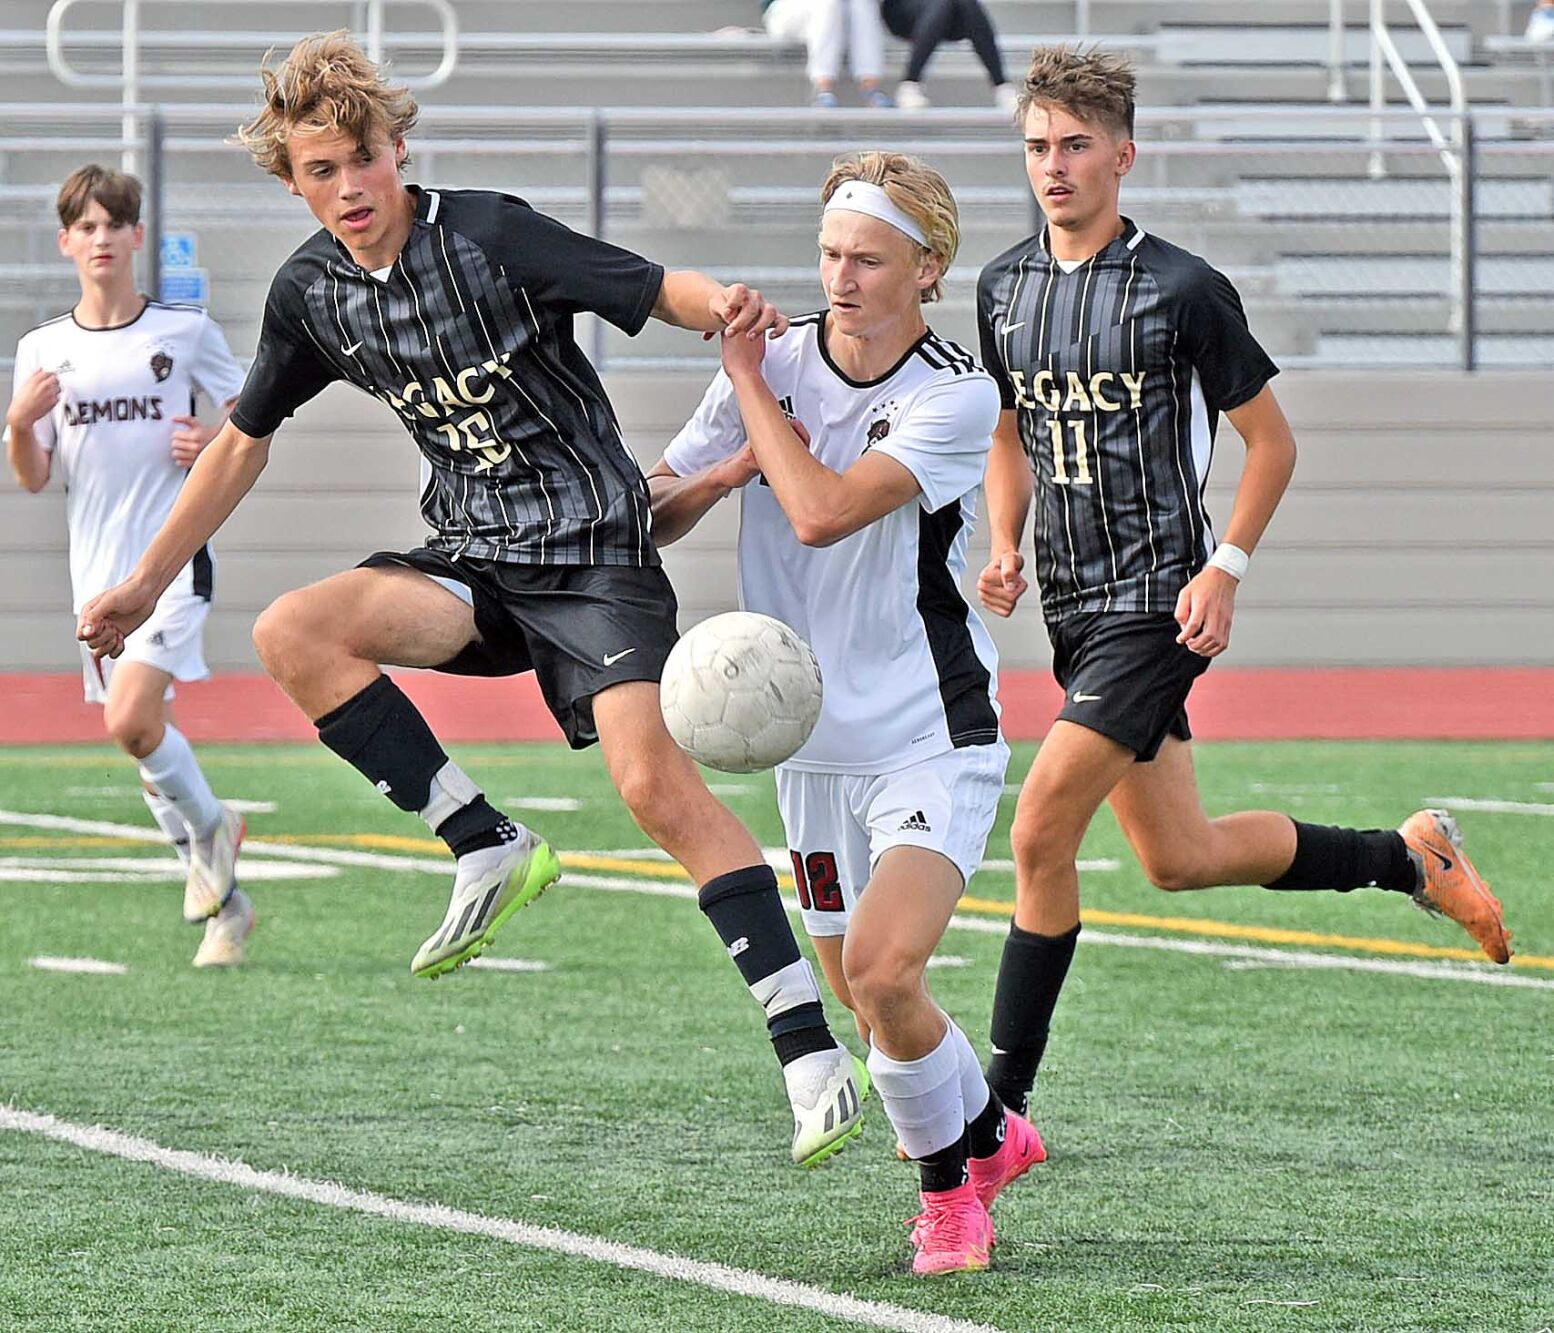 Bismarck’s strong defense holds Legacy to a scoreless draw